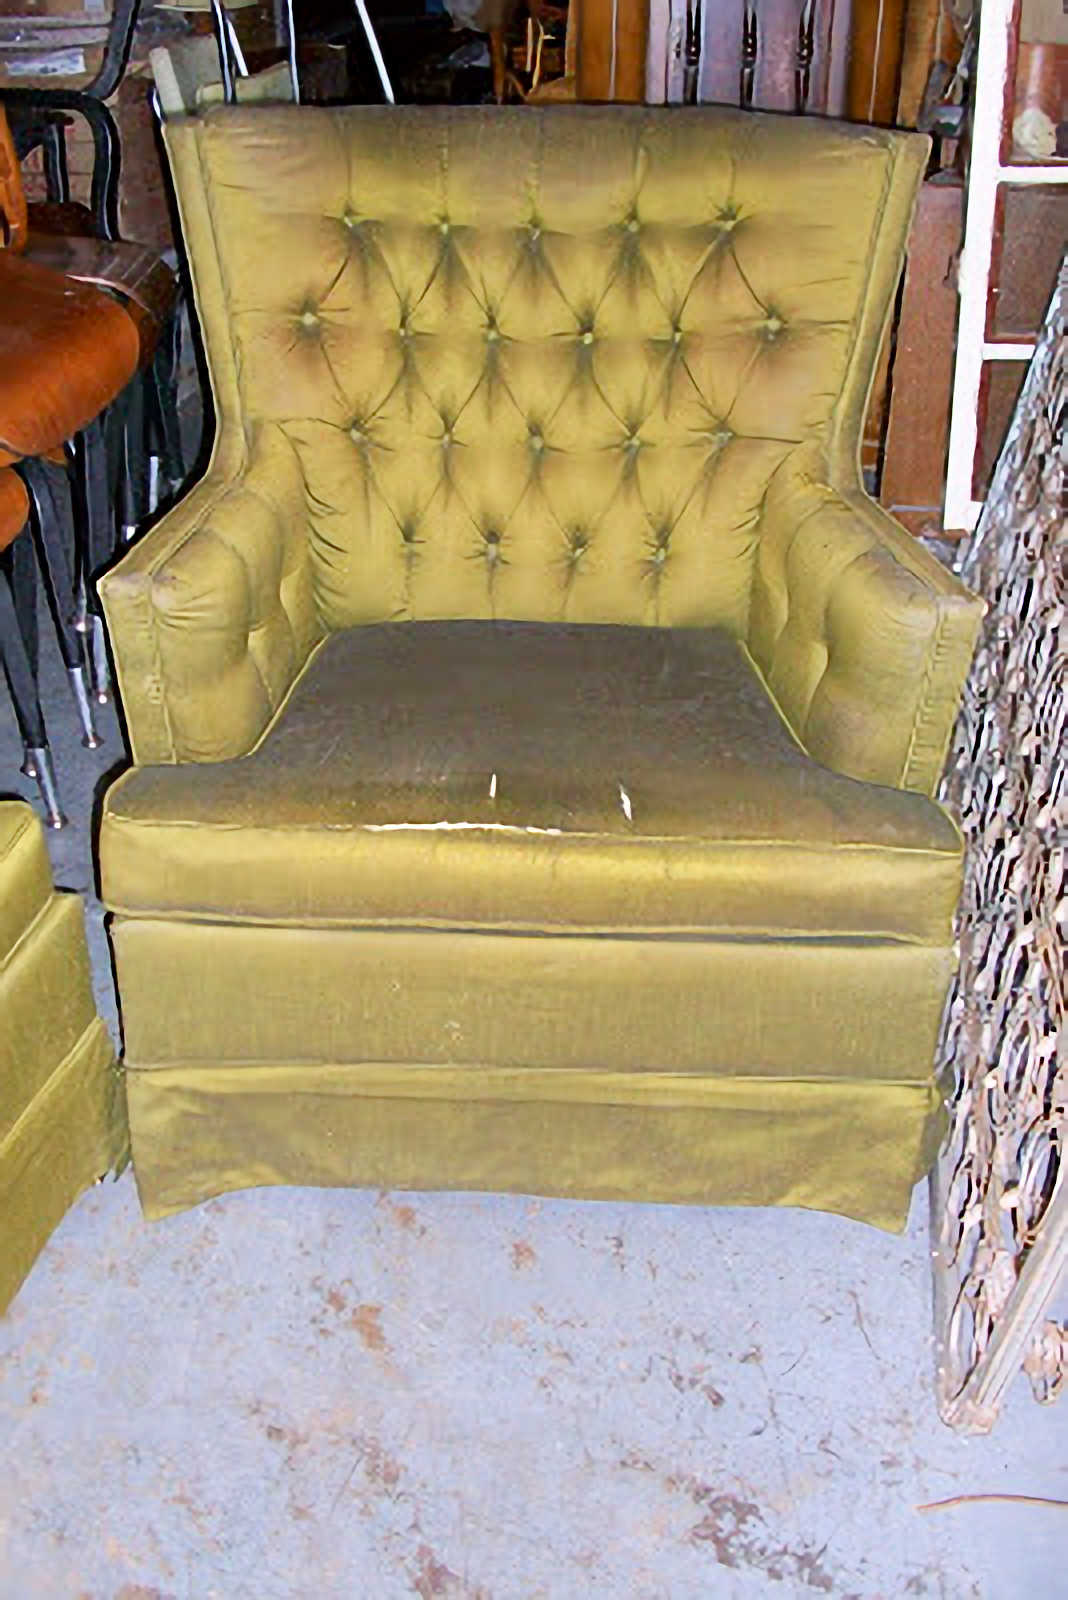 upholstered chairs with diamond tufted backs found at my favorite local thrift store